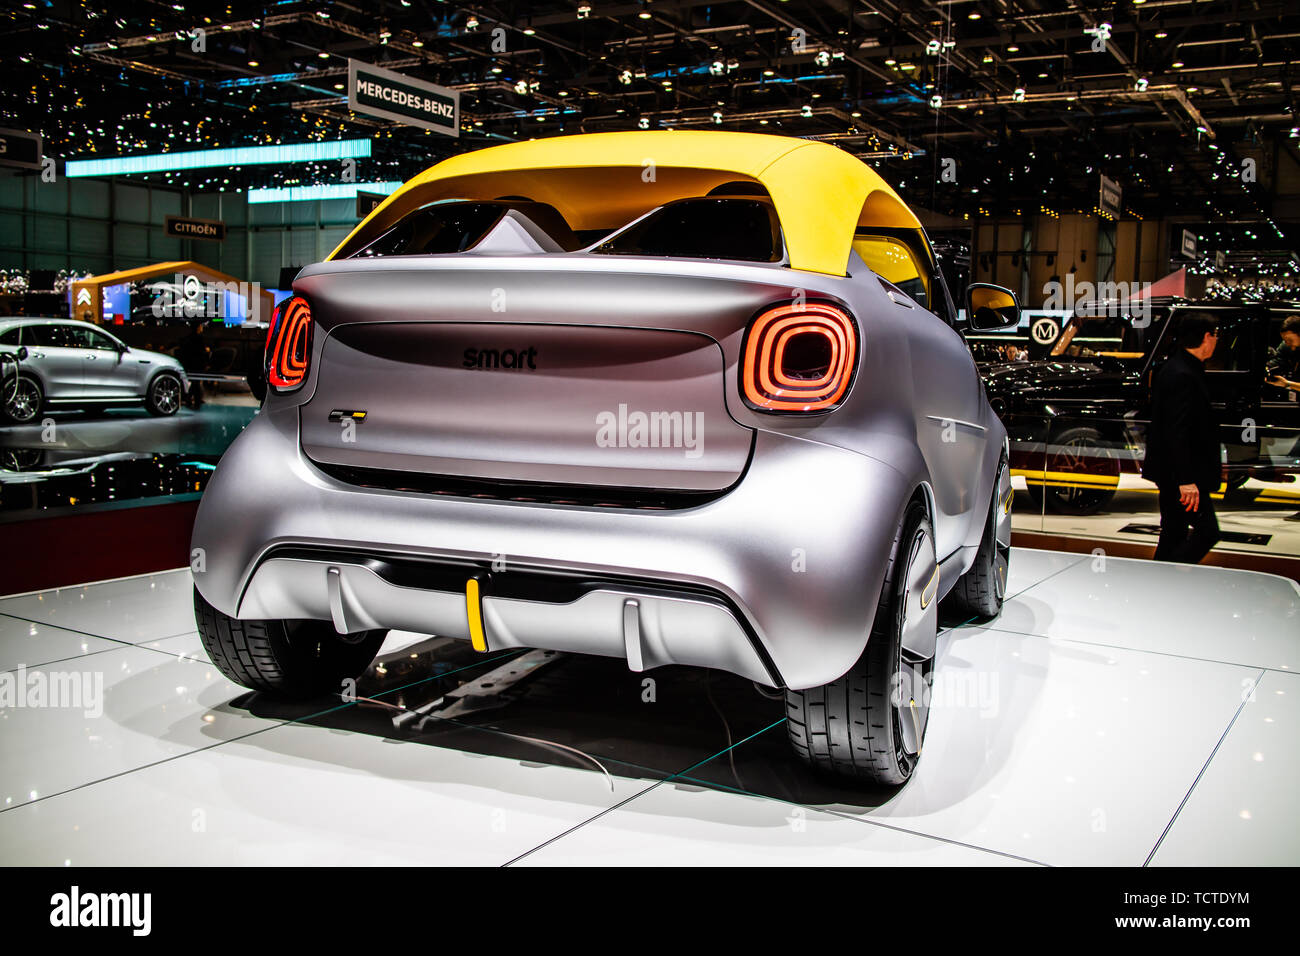 Geneva, Switzerland, March 05, 2019: Show car: Smart Forease vision EQ  fortwo Mercedes-Benz at Geneva International Motor Show, produced by  Mercedes Stock Photo - Alamy